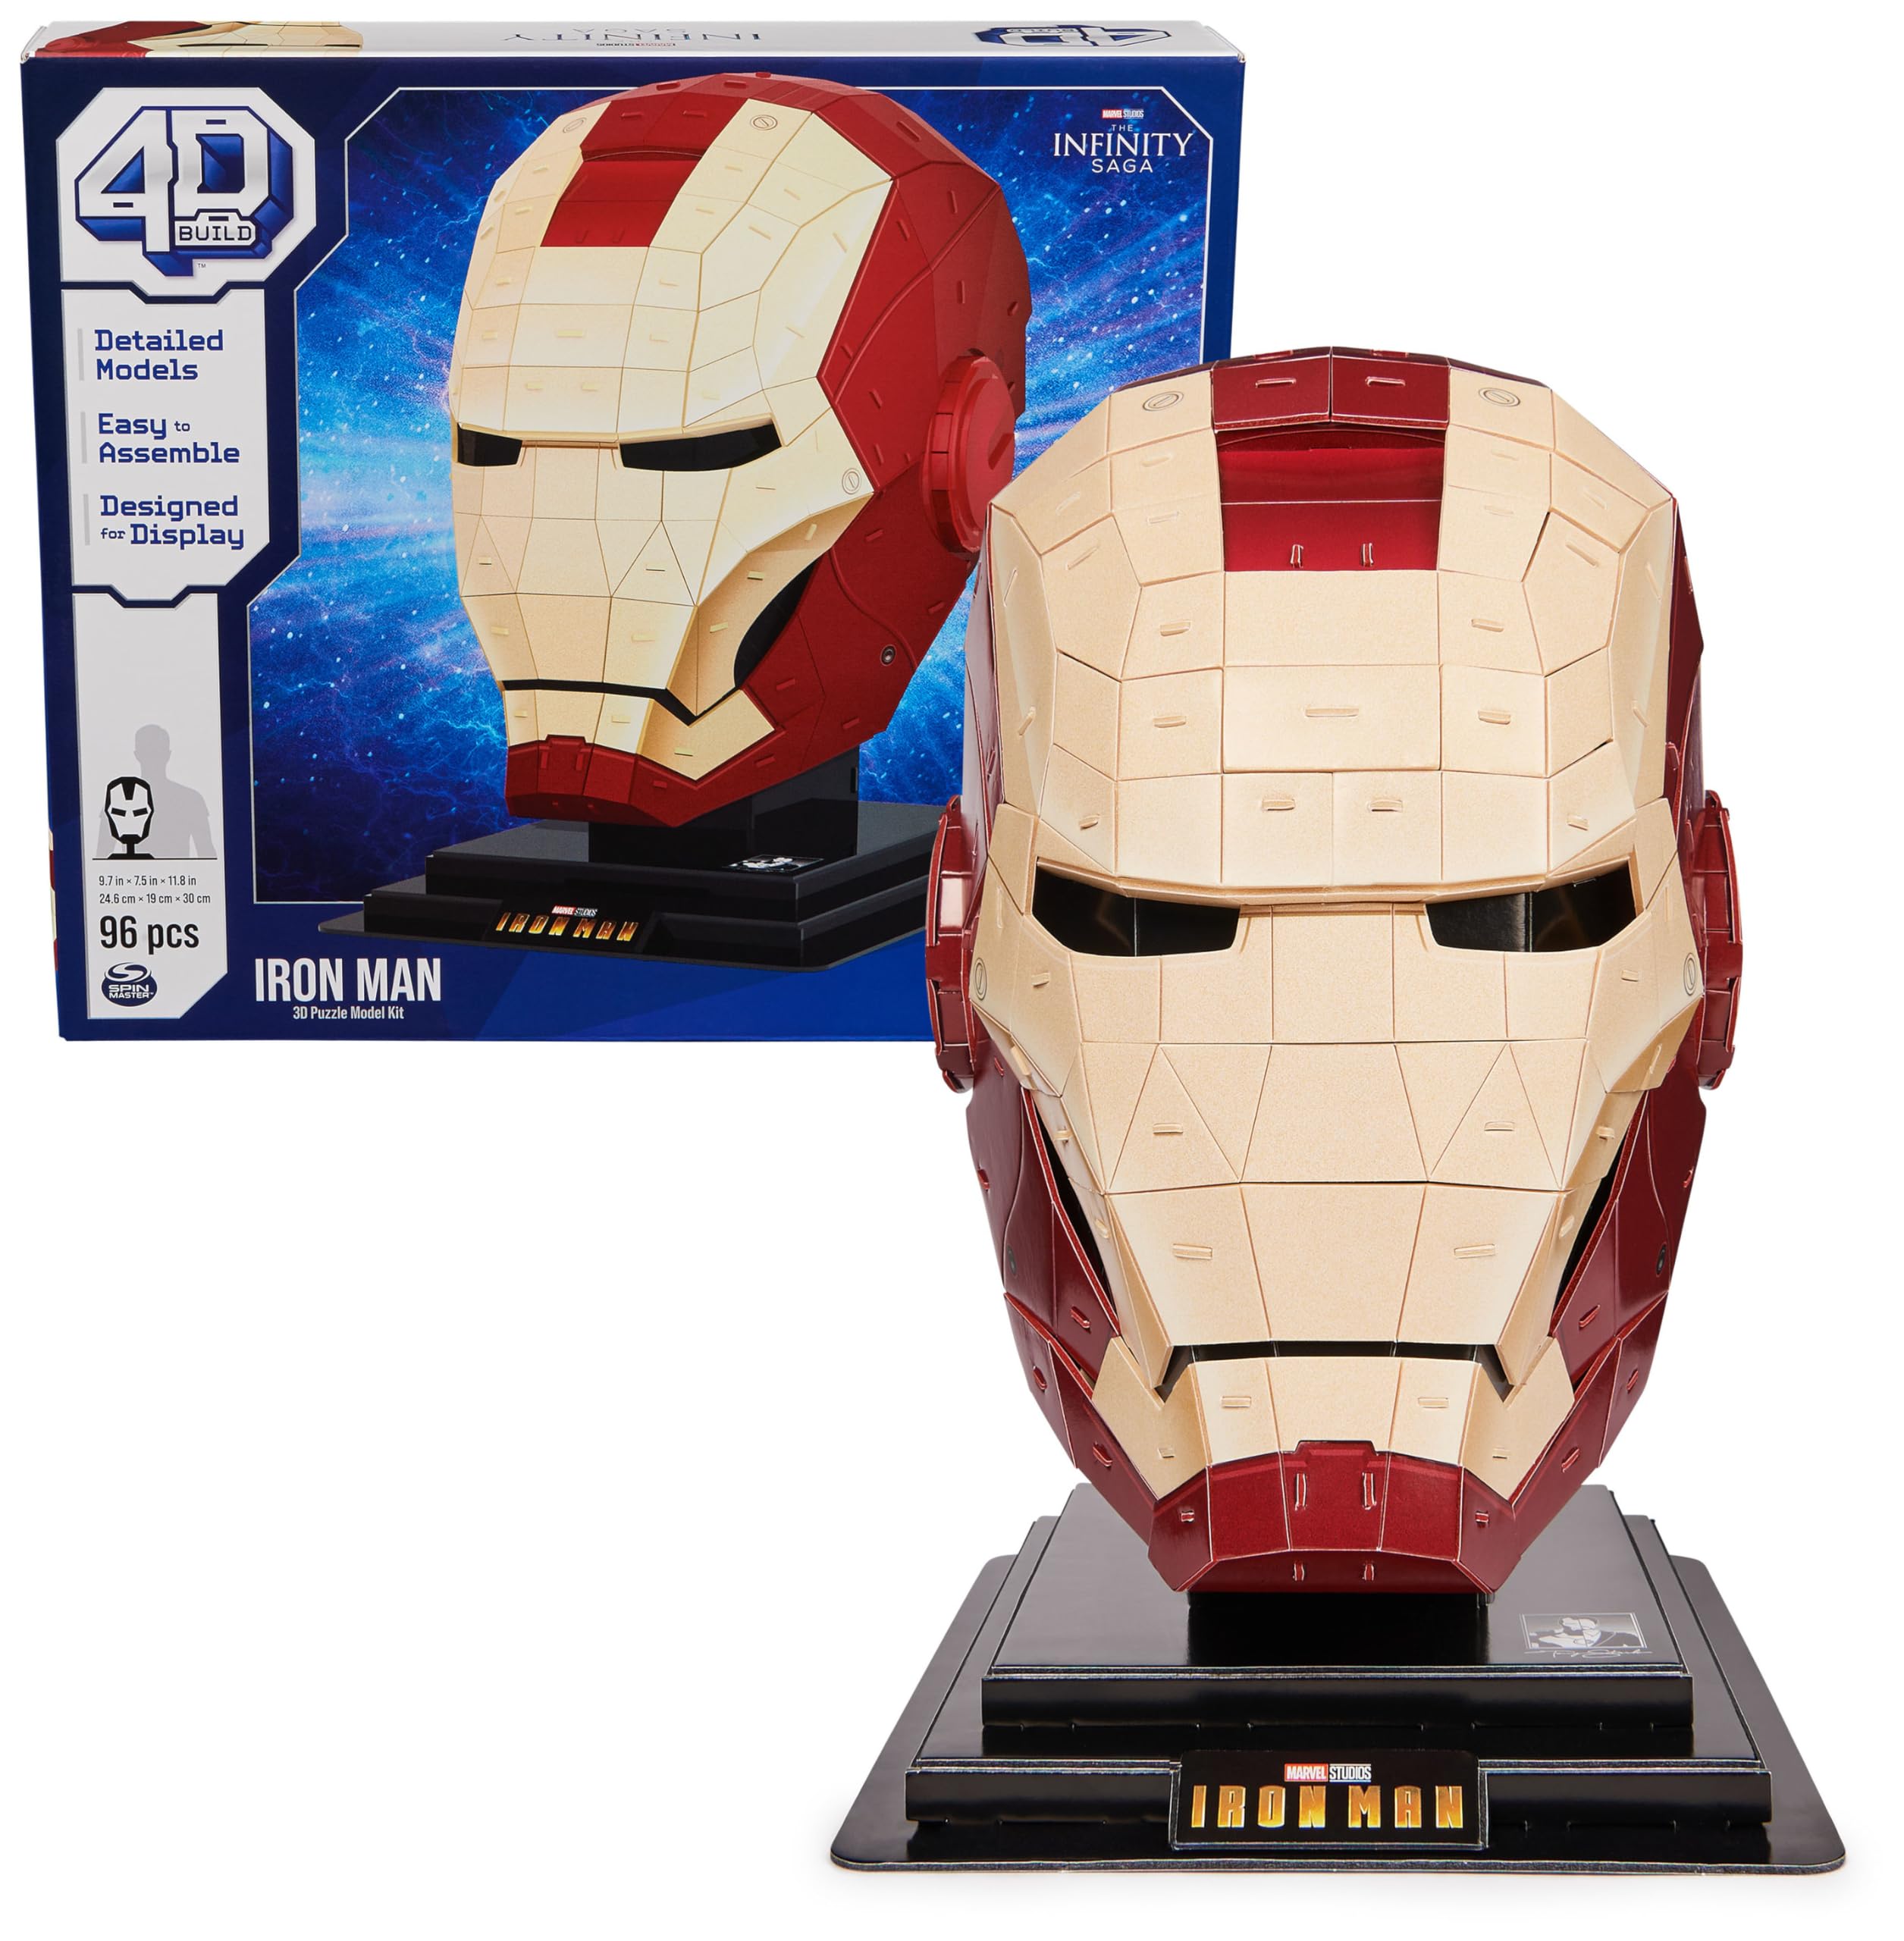 96-Piece 4D Build Marvel Iron Man Helmet 3D Puzzle Model Kit w/ Stand $8.39 + Free Shipping w/ Prime or on orders over $35